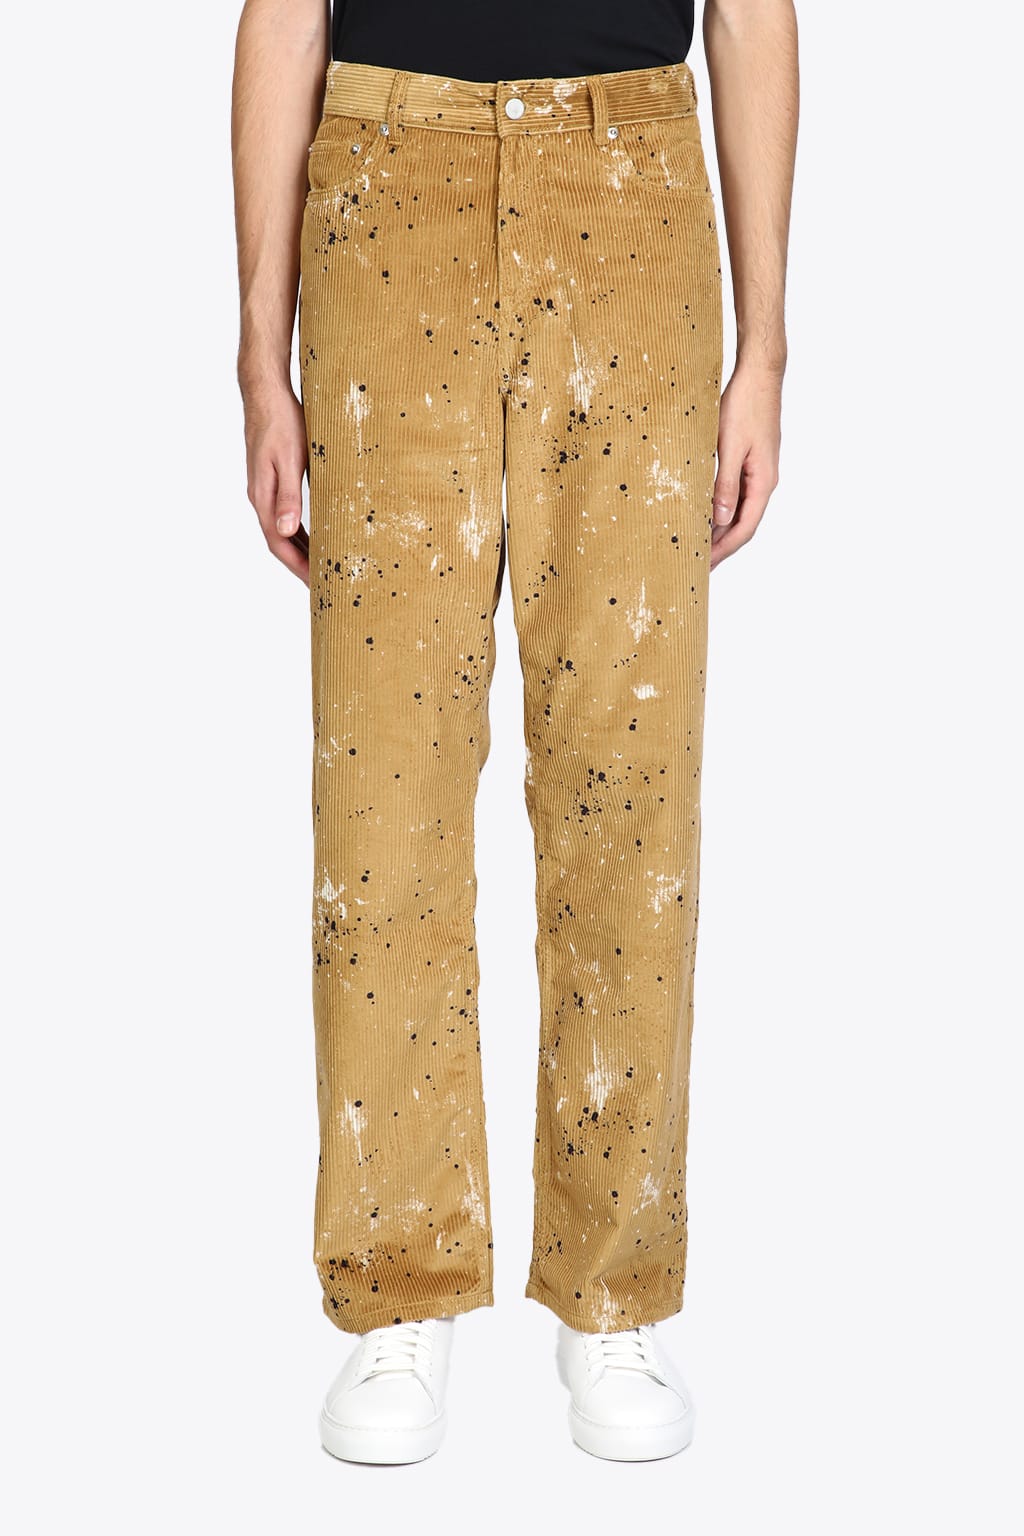 CMMN SWDN 5 Pocket Jeans With A Deep Rise And A Straight Leg Beige corduroy pant with painting spots - Gene